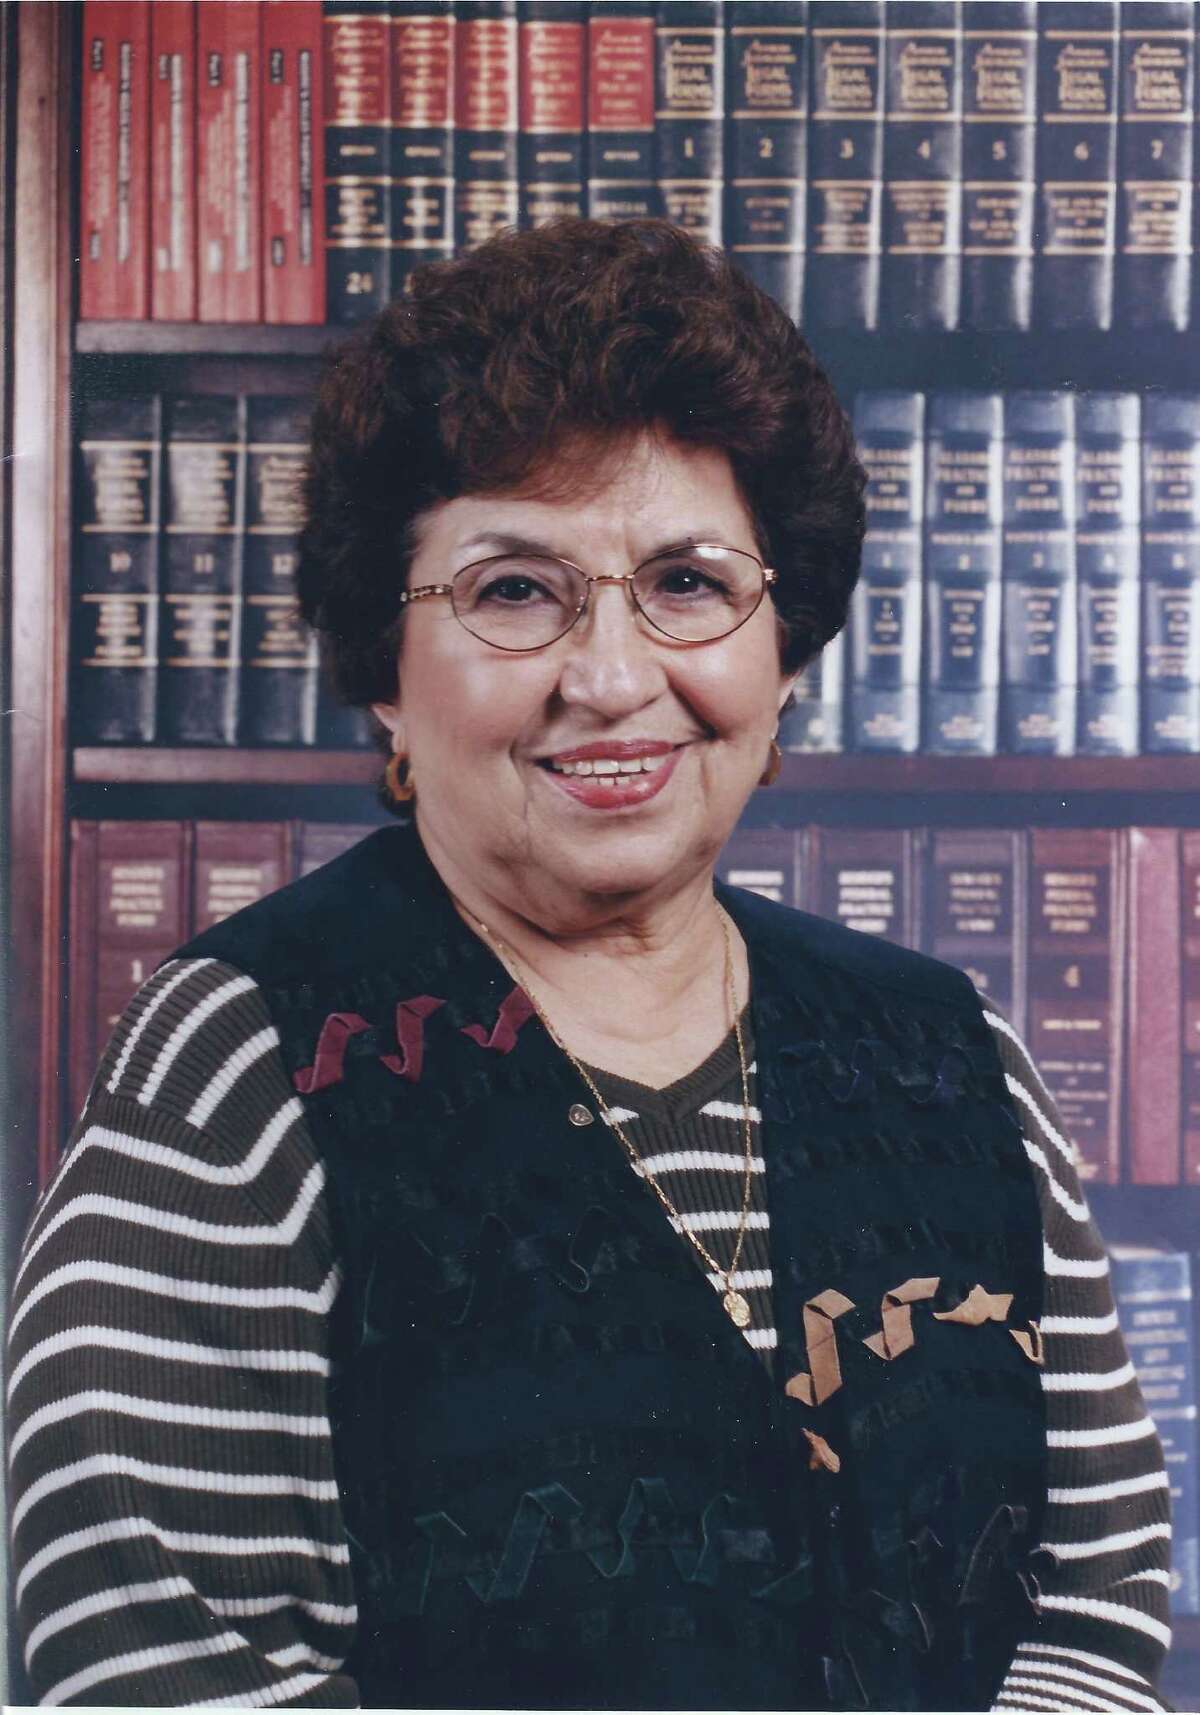 Obit photo for Socorro Beltran Sanchez, who for more than 40 years worked in education, died Feb. 11, 2016 in San Antonio.